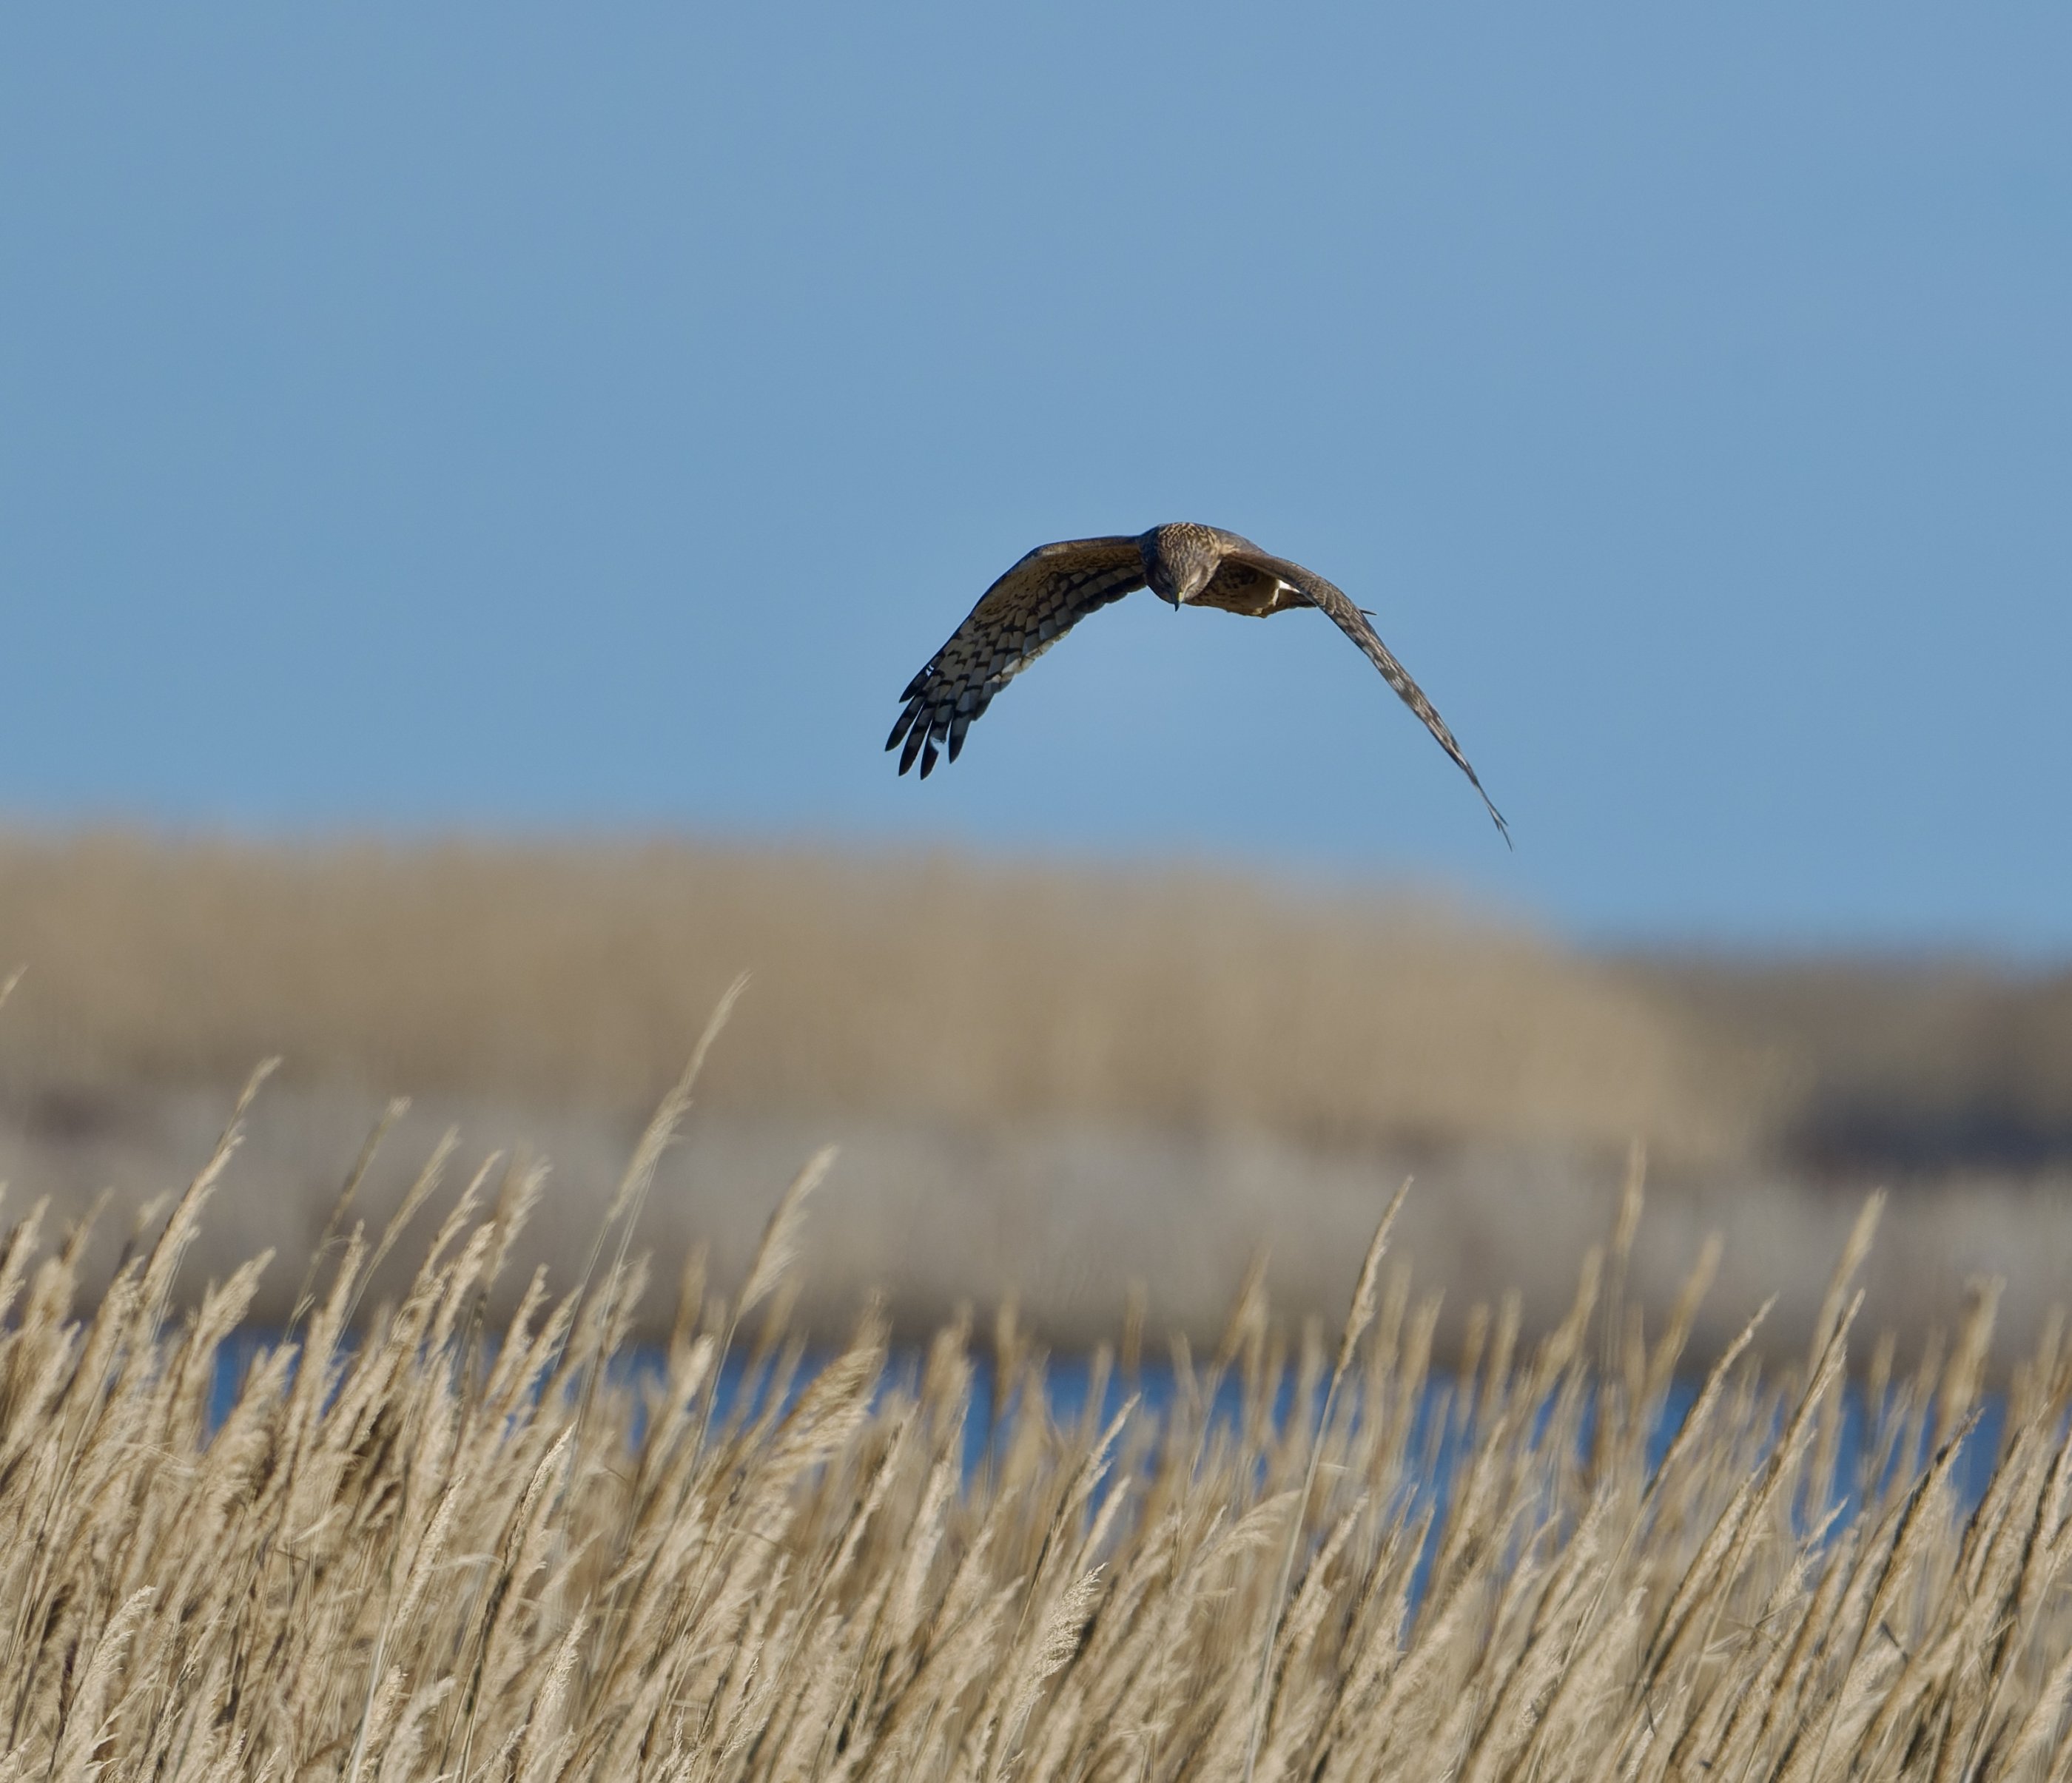 Northern Harrier | Backcountry Gallery Photography Forums